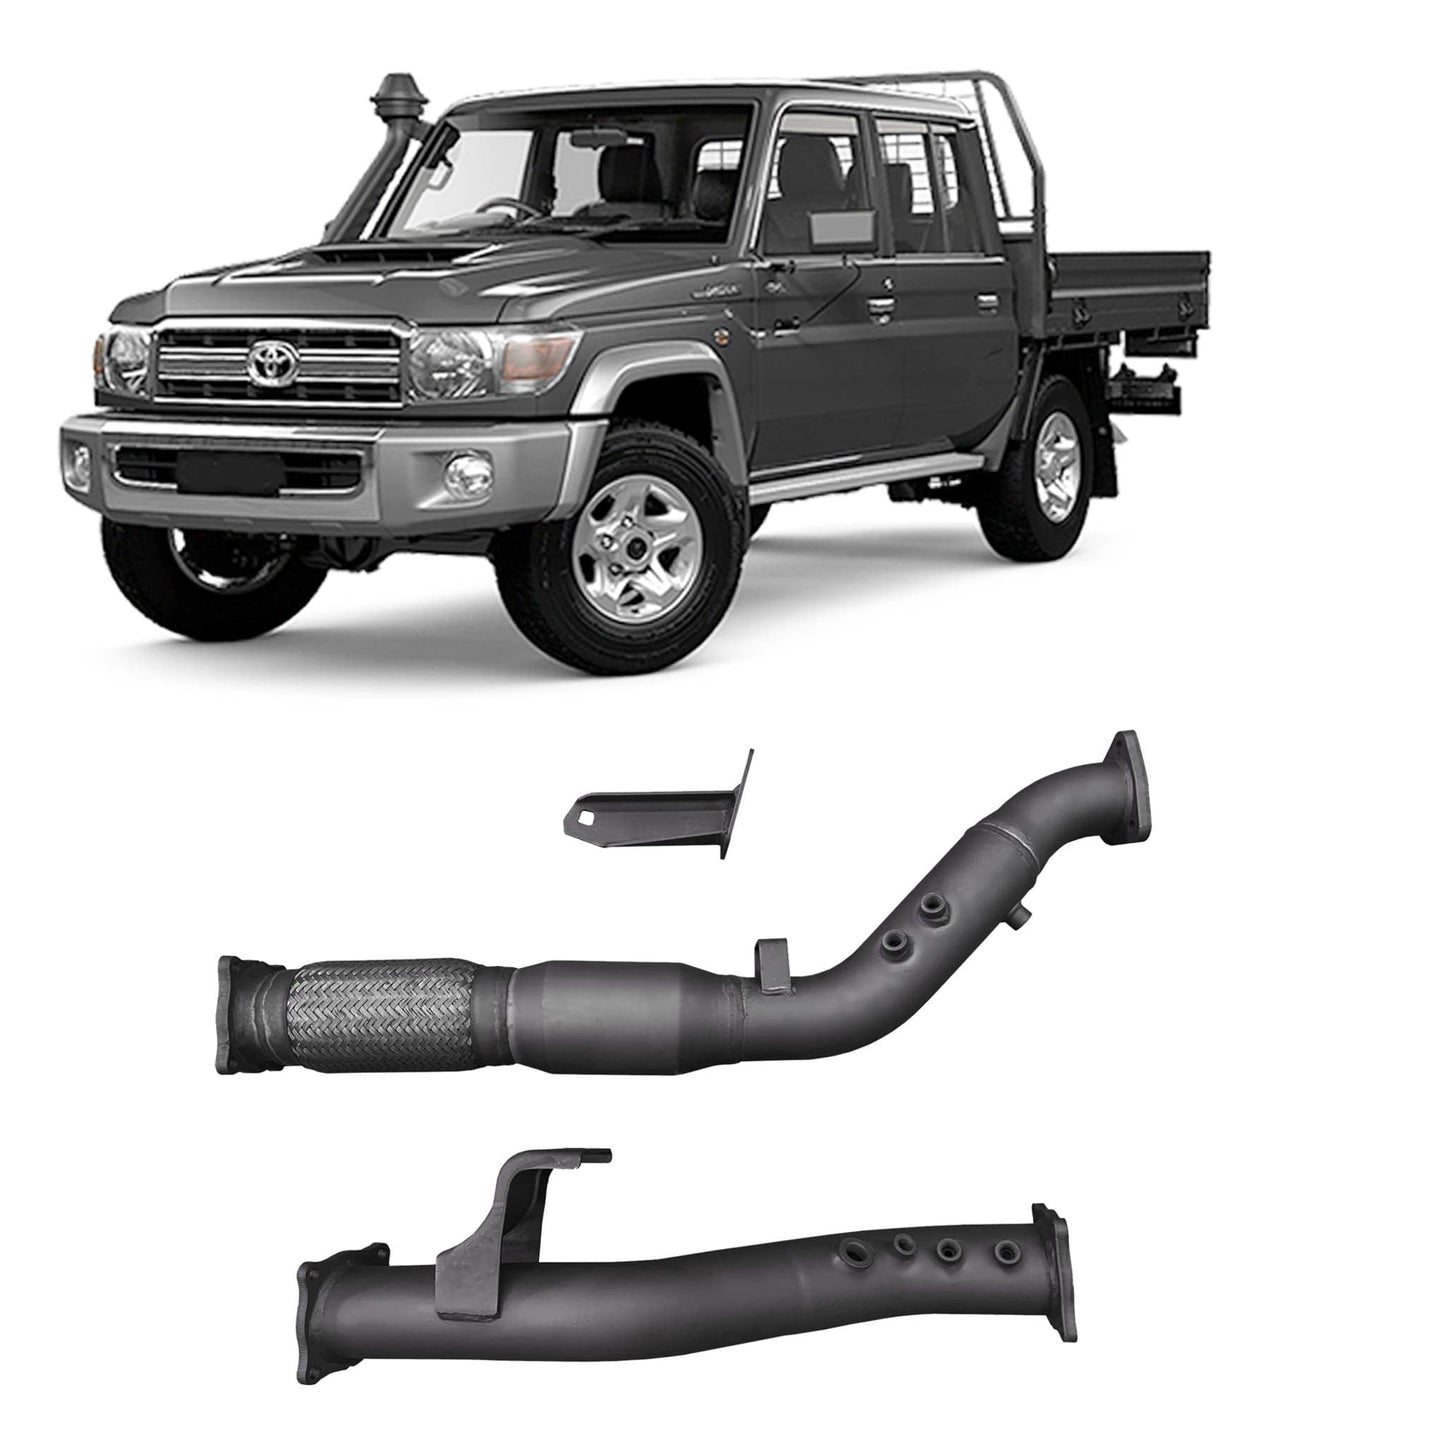 Redback Extreme Duty Exhaust DPF Adaptor Kit for Toyota Landcruiser 76 Series Wagon, 79 Series Single and Double Cab (11/2016 - on)